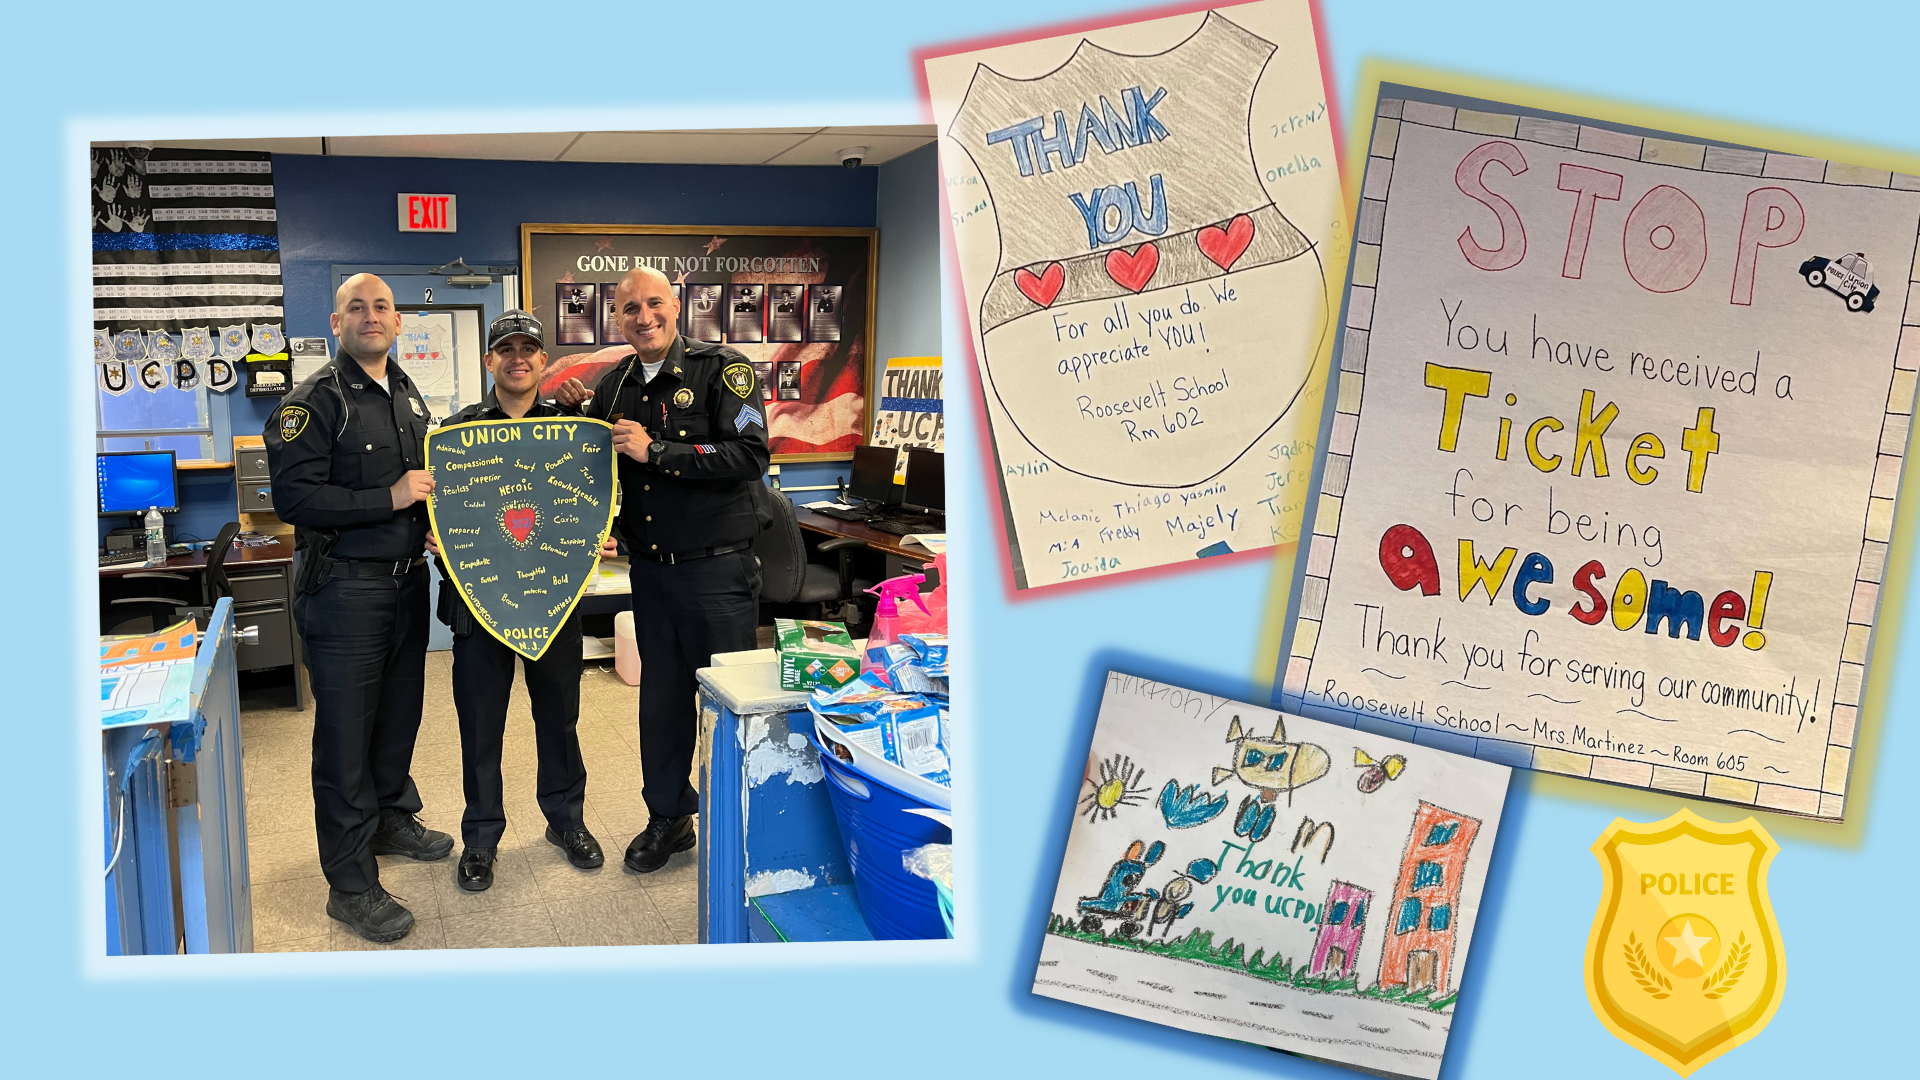 Roosevelt School honoring the Union City Police Department during Police Appreciation Week #3